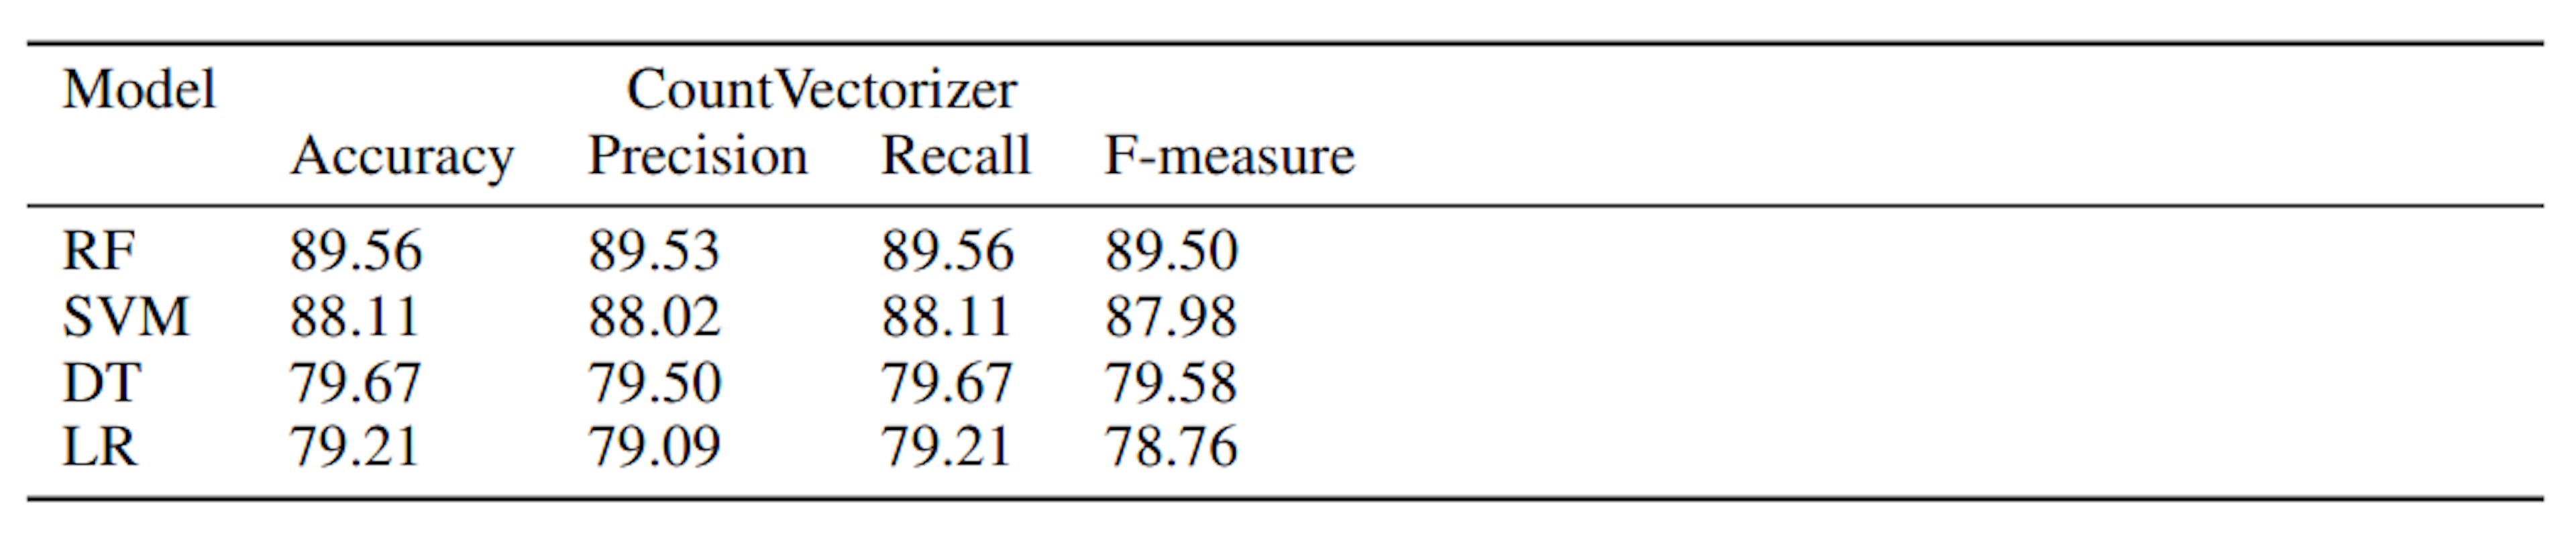 Table 4: Precision, Recall, Accuracy, and F-Measure values for CountVectorizer